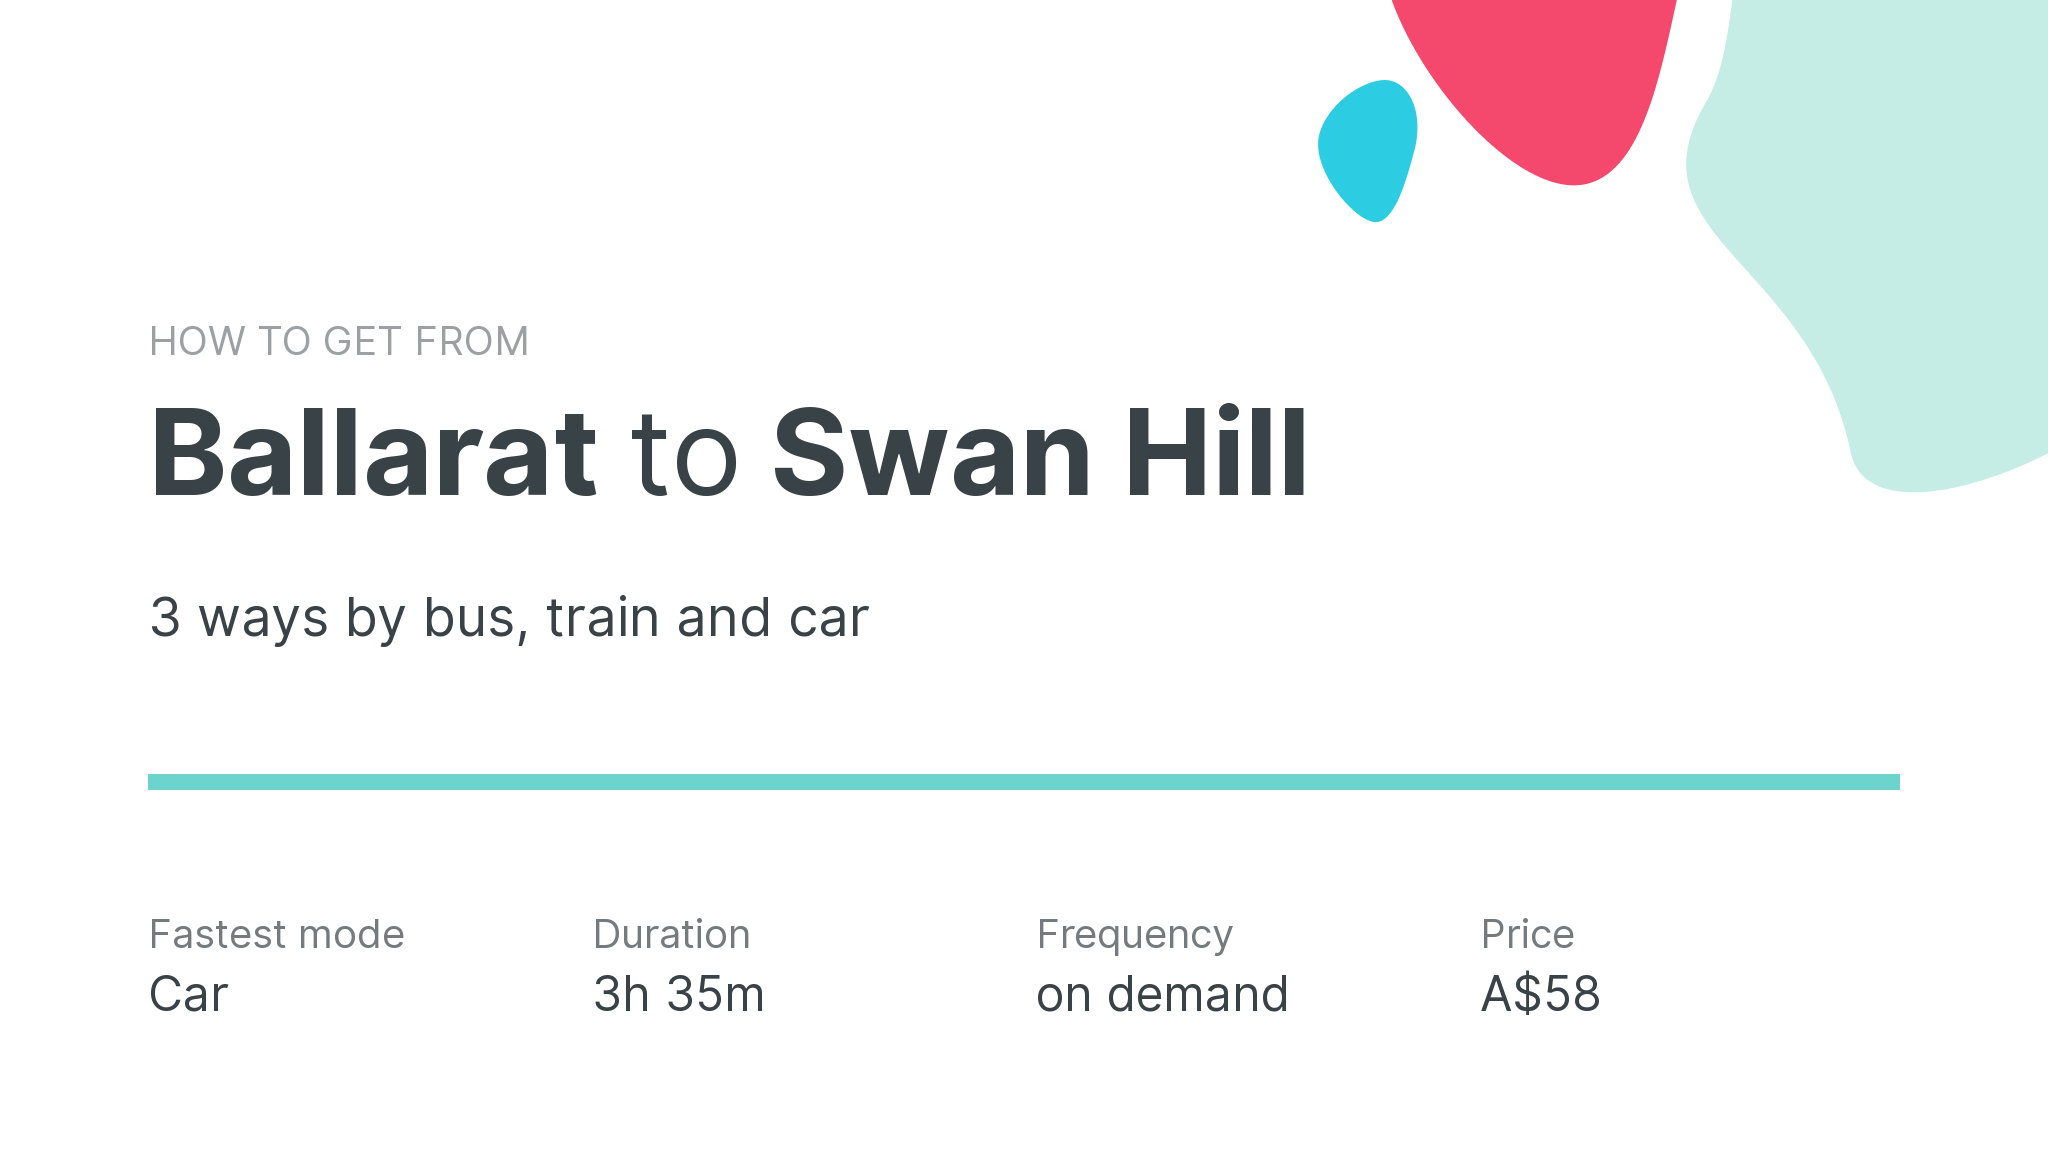 How do I get from Ballarat to Swan Hill